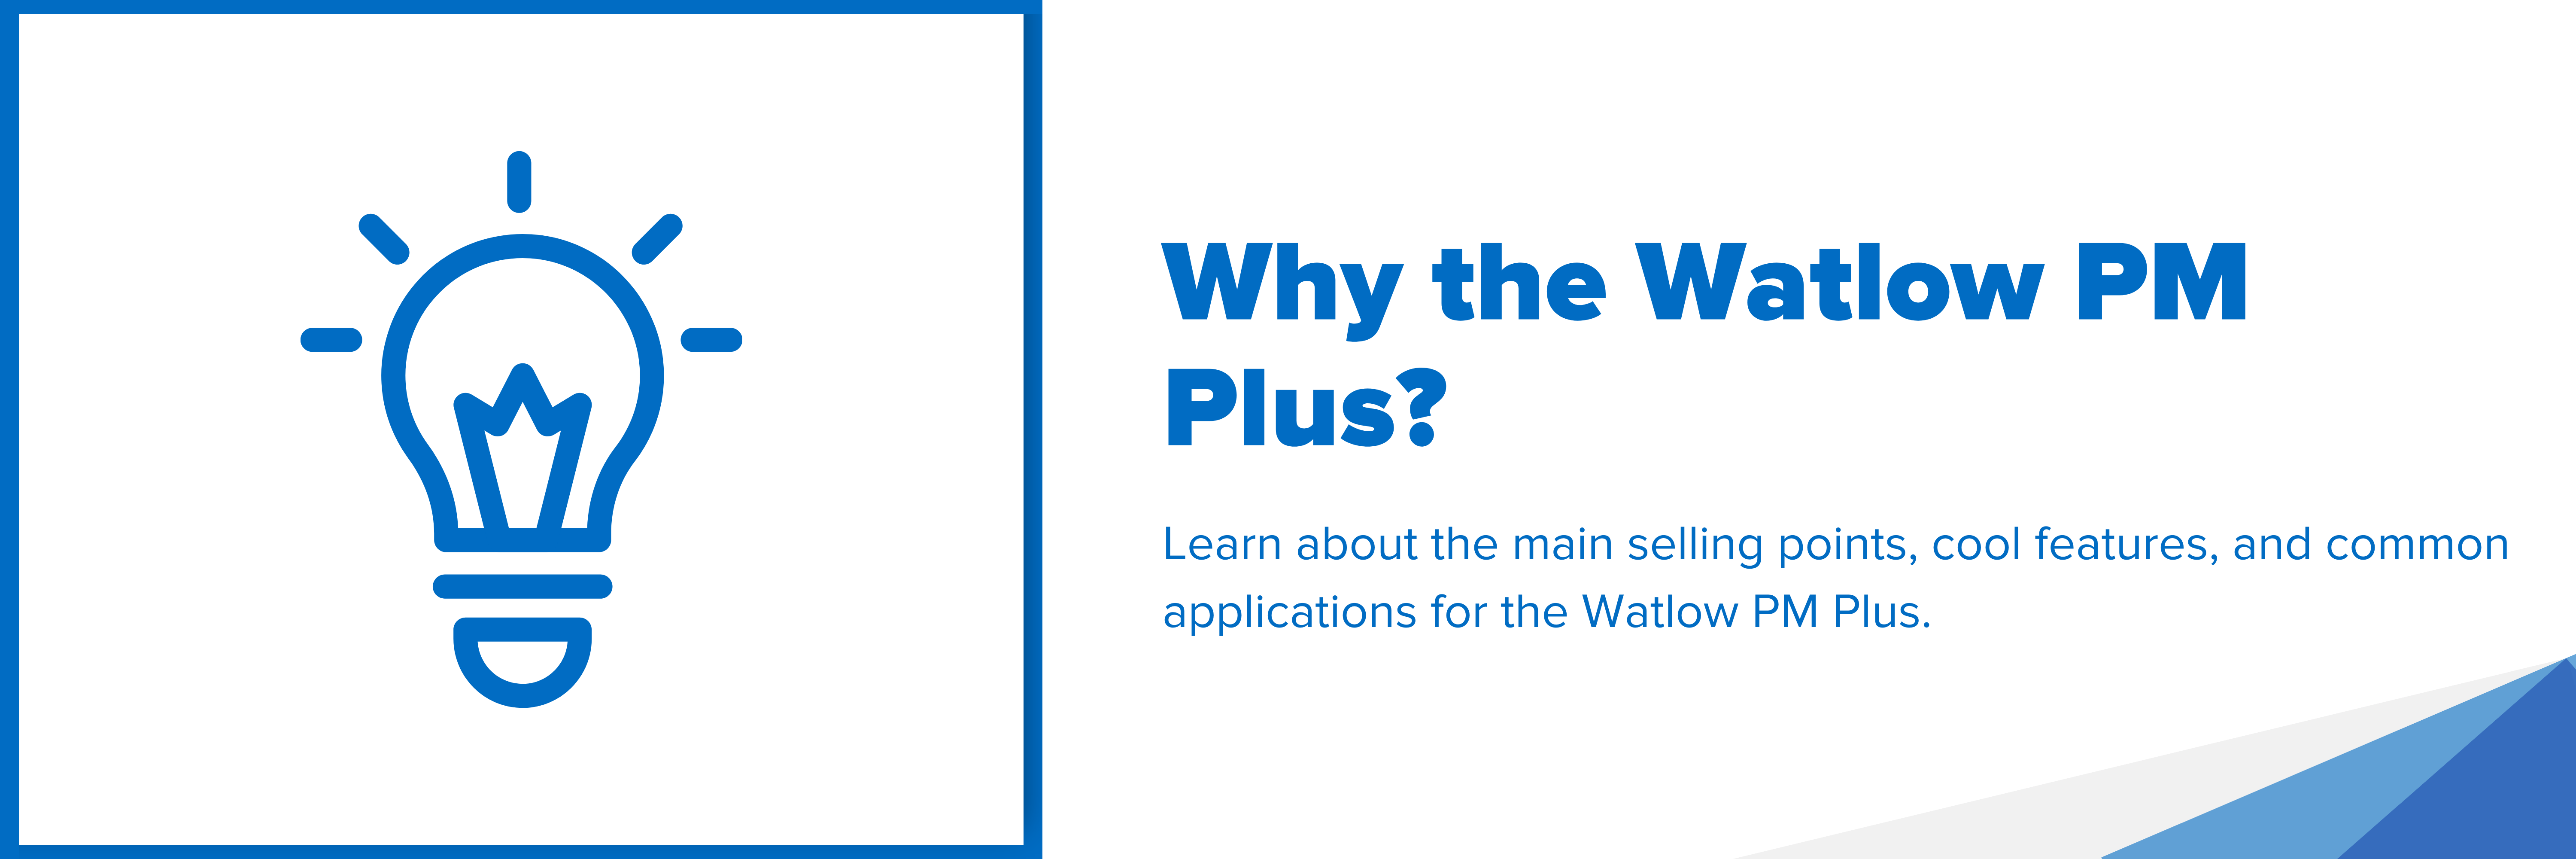 Header image with the text "Why the Watlow PM Plus?"